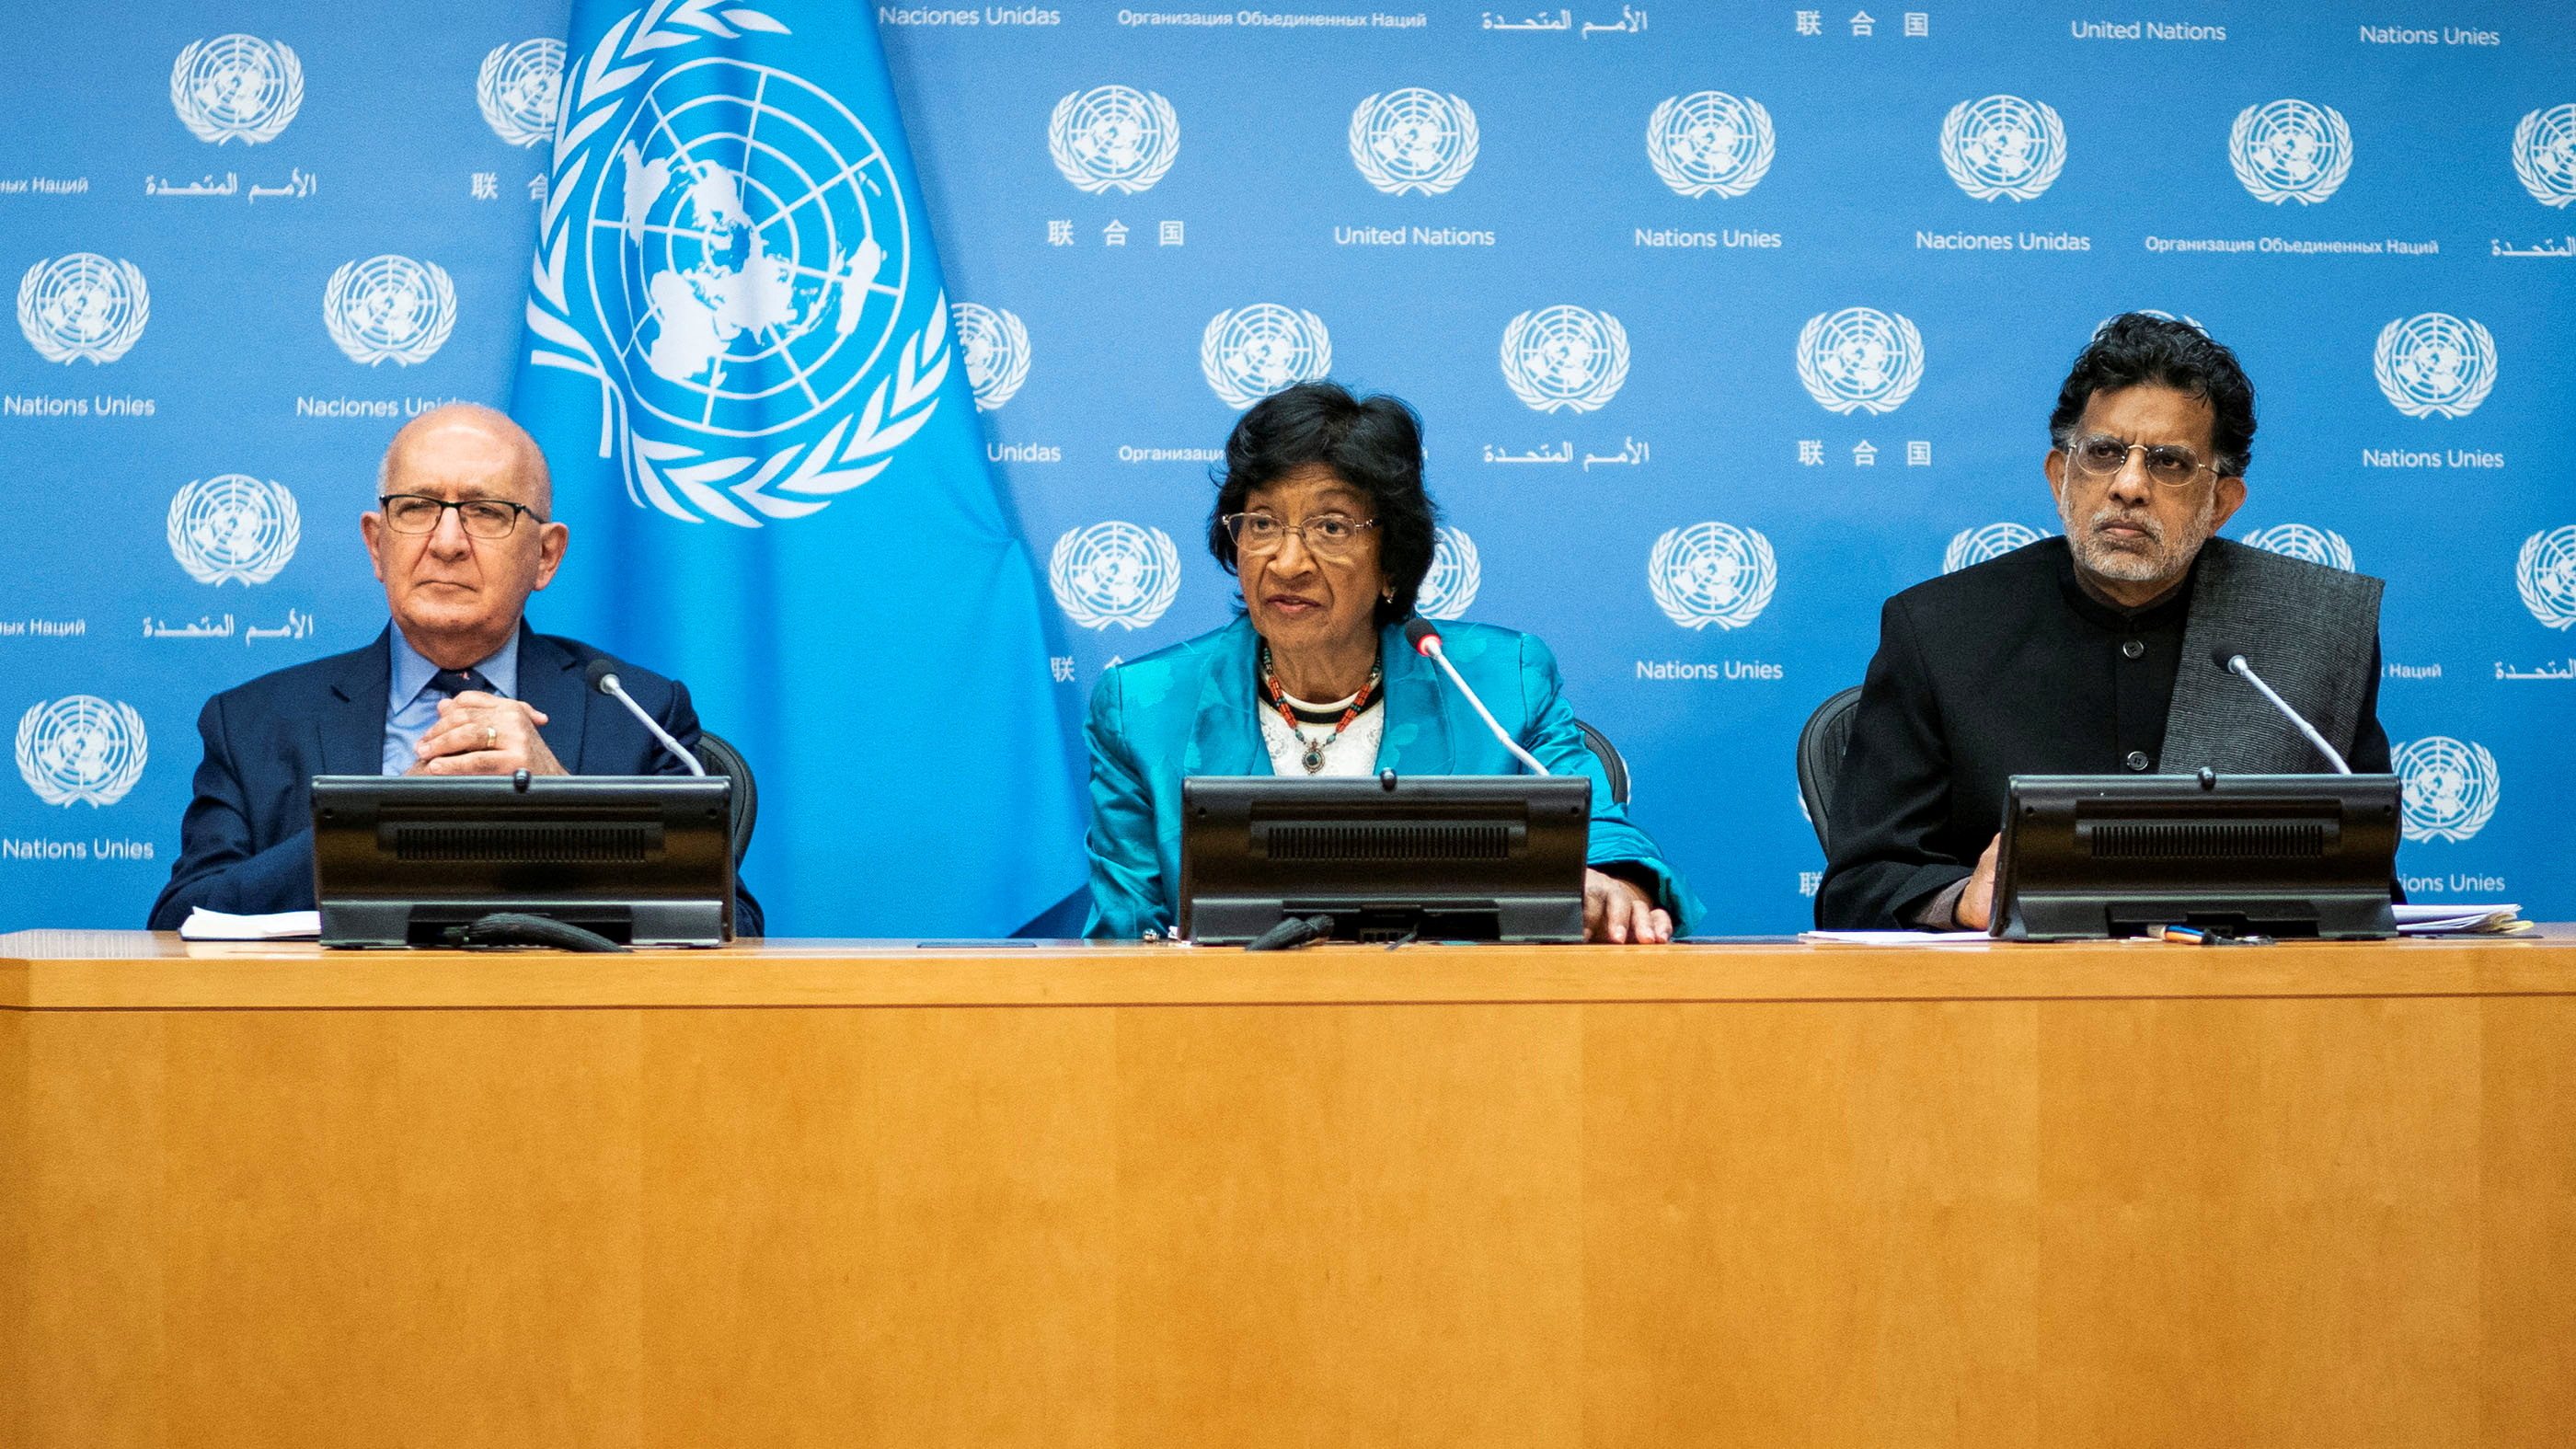 Members of the UN Independent International Commission of Inquiry attend a press briefing at the UN headquarters in New York